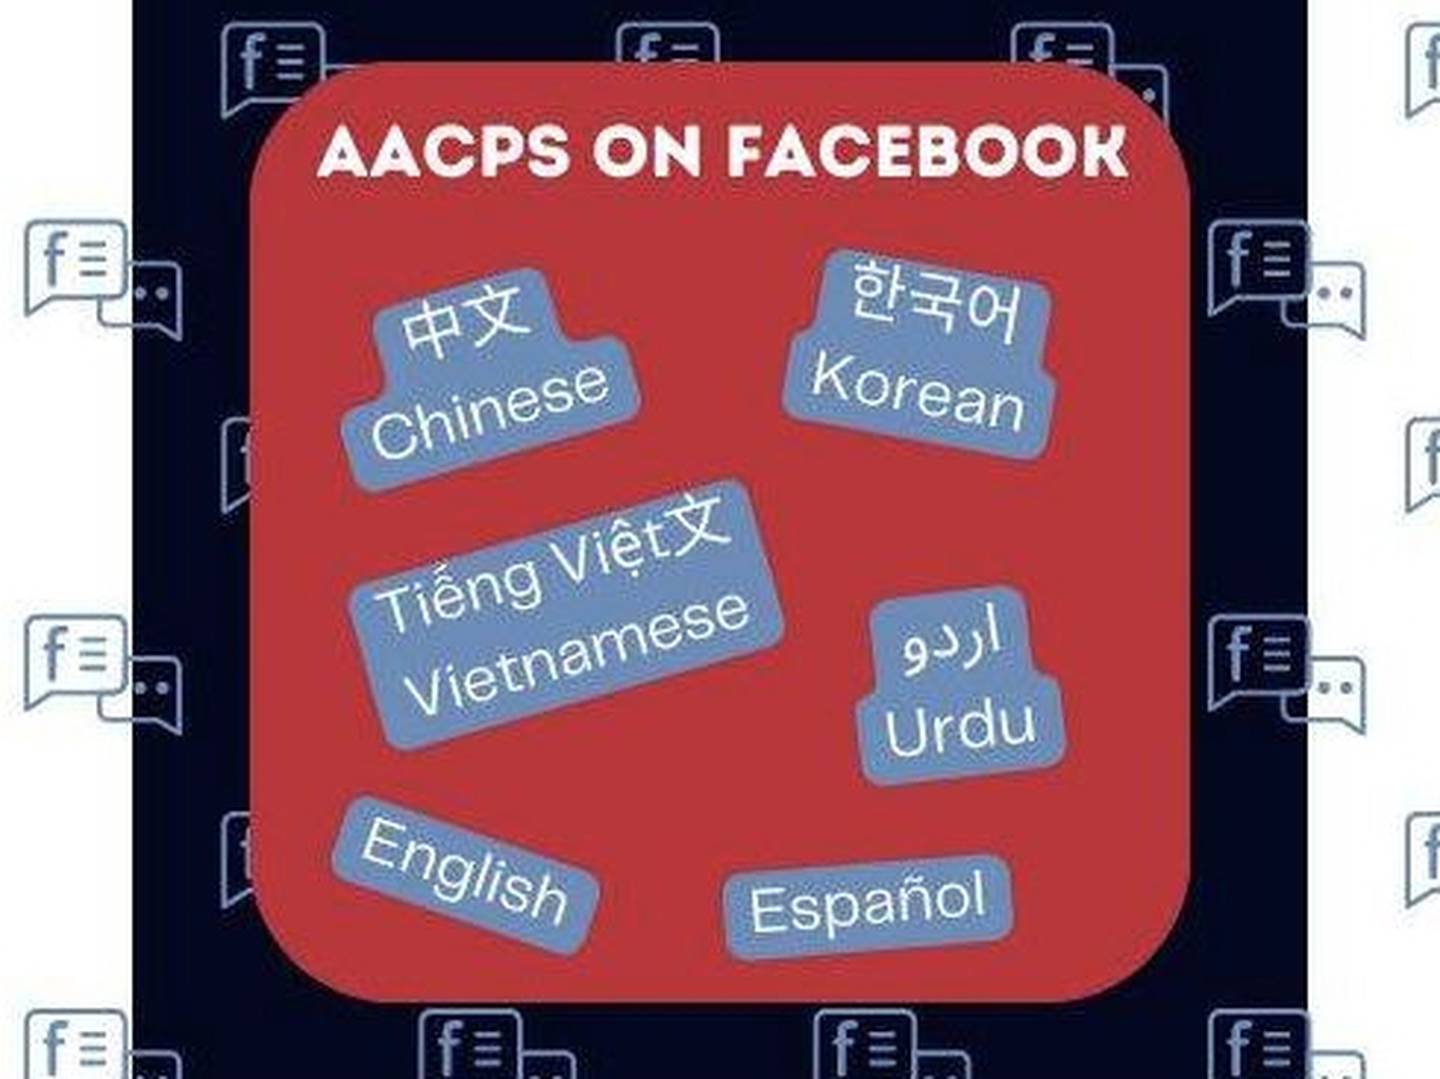 Anne Arundel County has launched new Facebook pages in different languages.